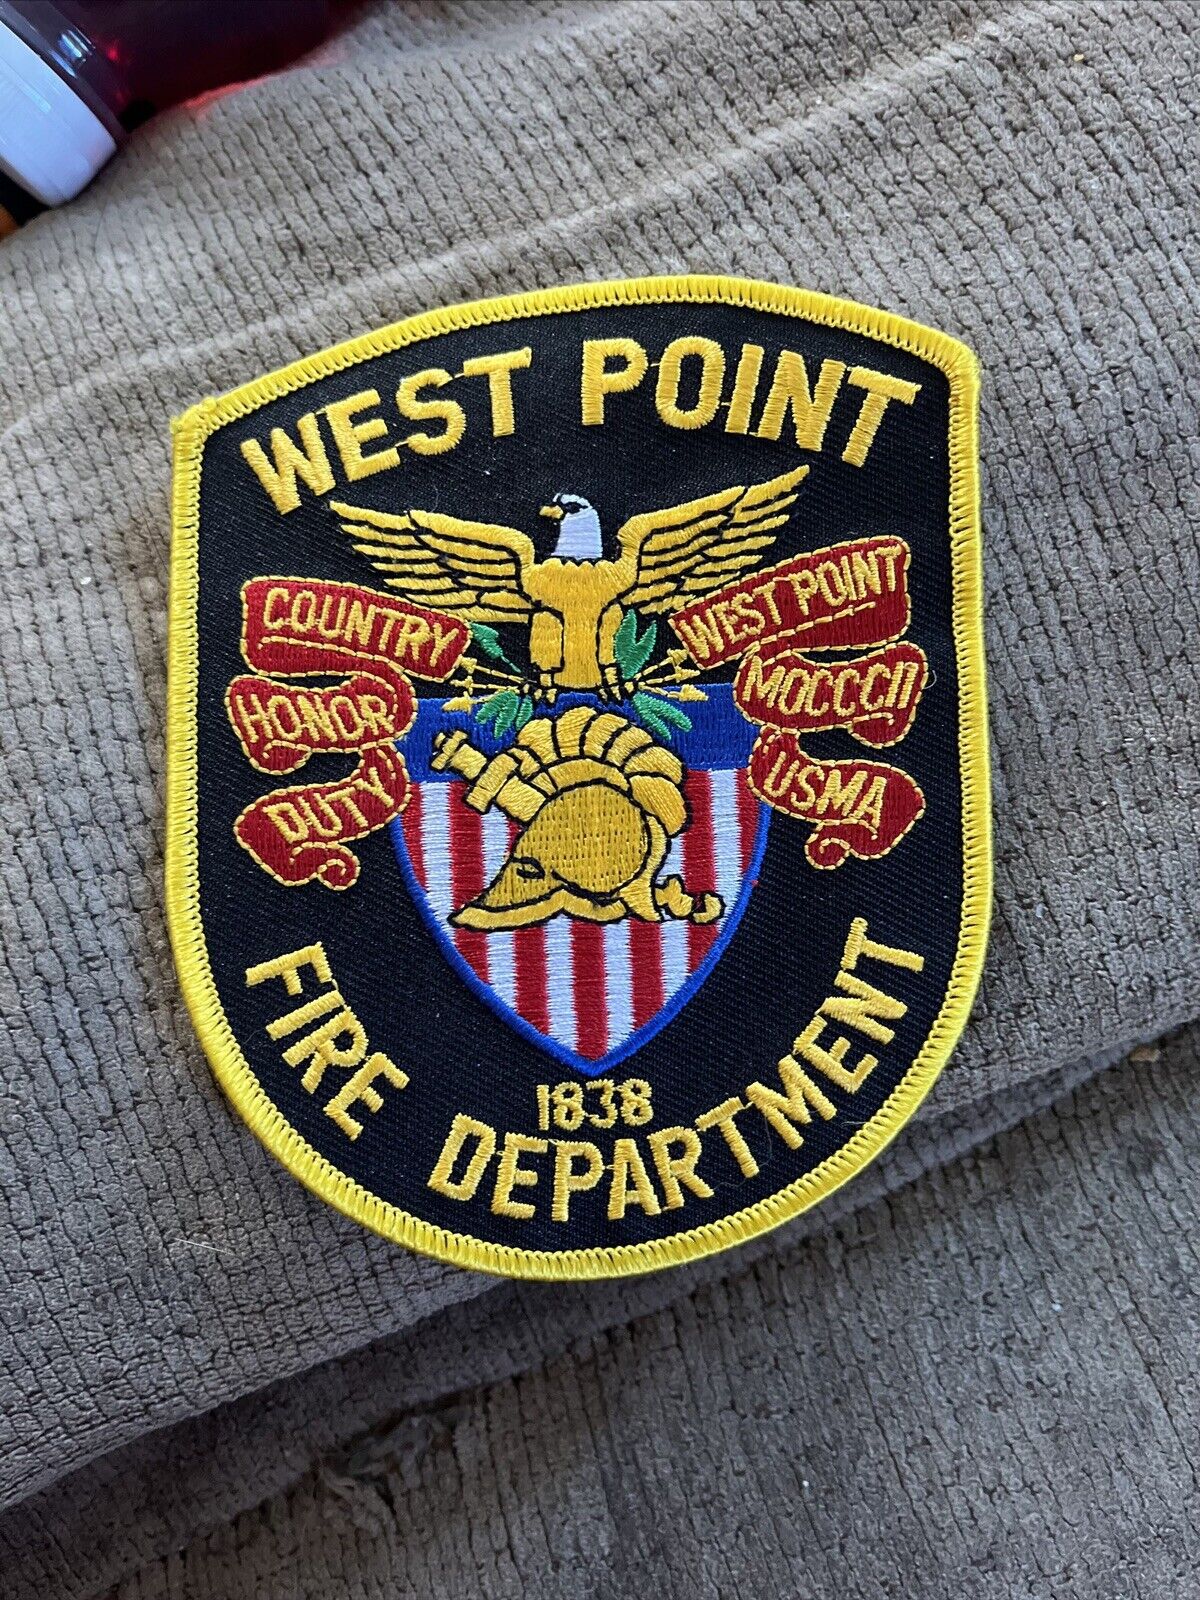 New York - West Point US Military Academy NY Fire Dept Patch